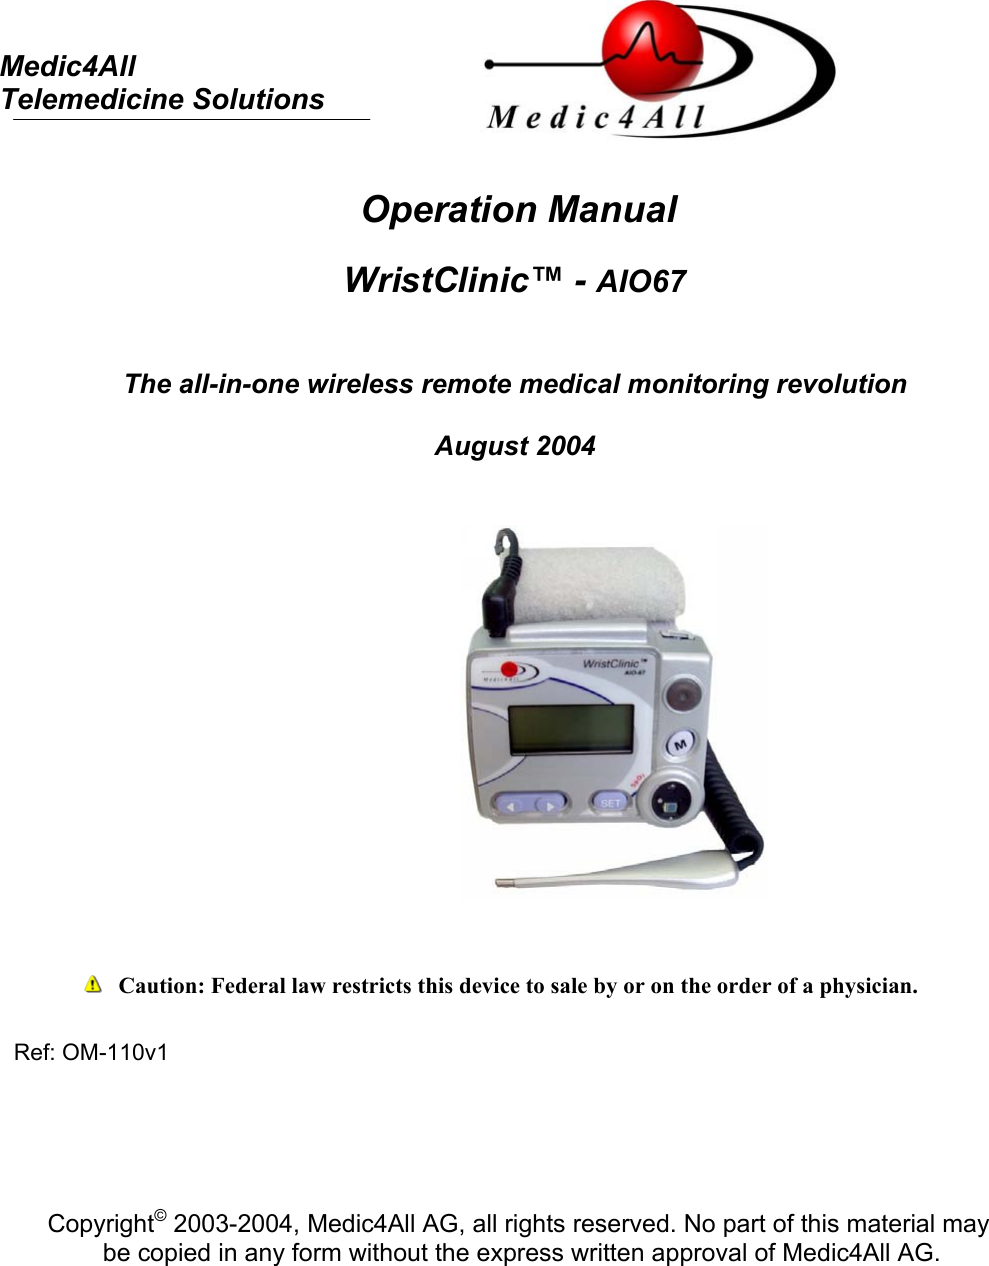     Medic4All  Telemedicine Solutions   Operation Manual   WristClinic™ - AIO67   The all-in-one wireless remote medical monitoring revolution  August 2004                   Caution: Federal law restricts this device to sale by or on the order of a physician.  Ref: OM-110v1      Copyright© 2003-2004, Medic4All AG, all rights reserved. No part of this material may  be copied in any form without the express written approval of Medic4All AG.  